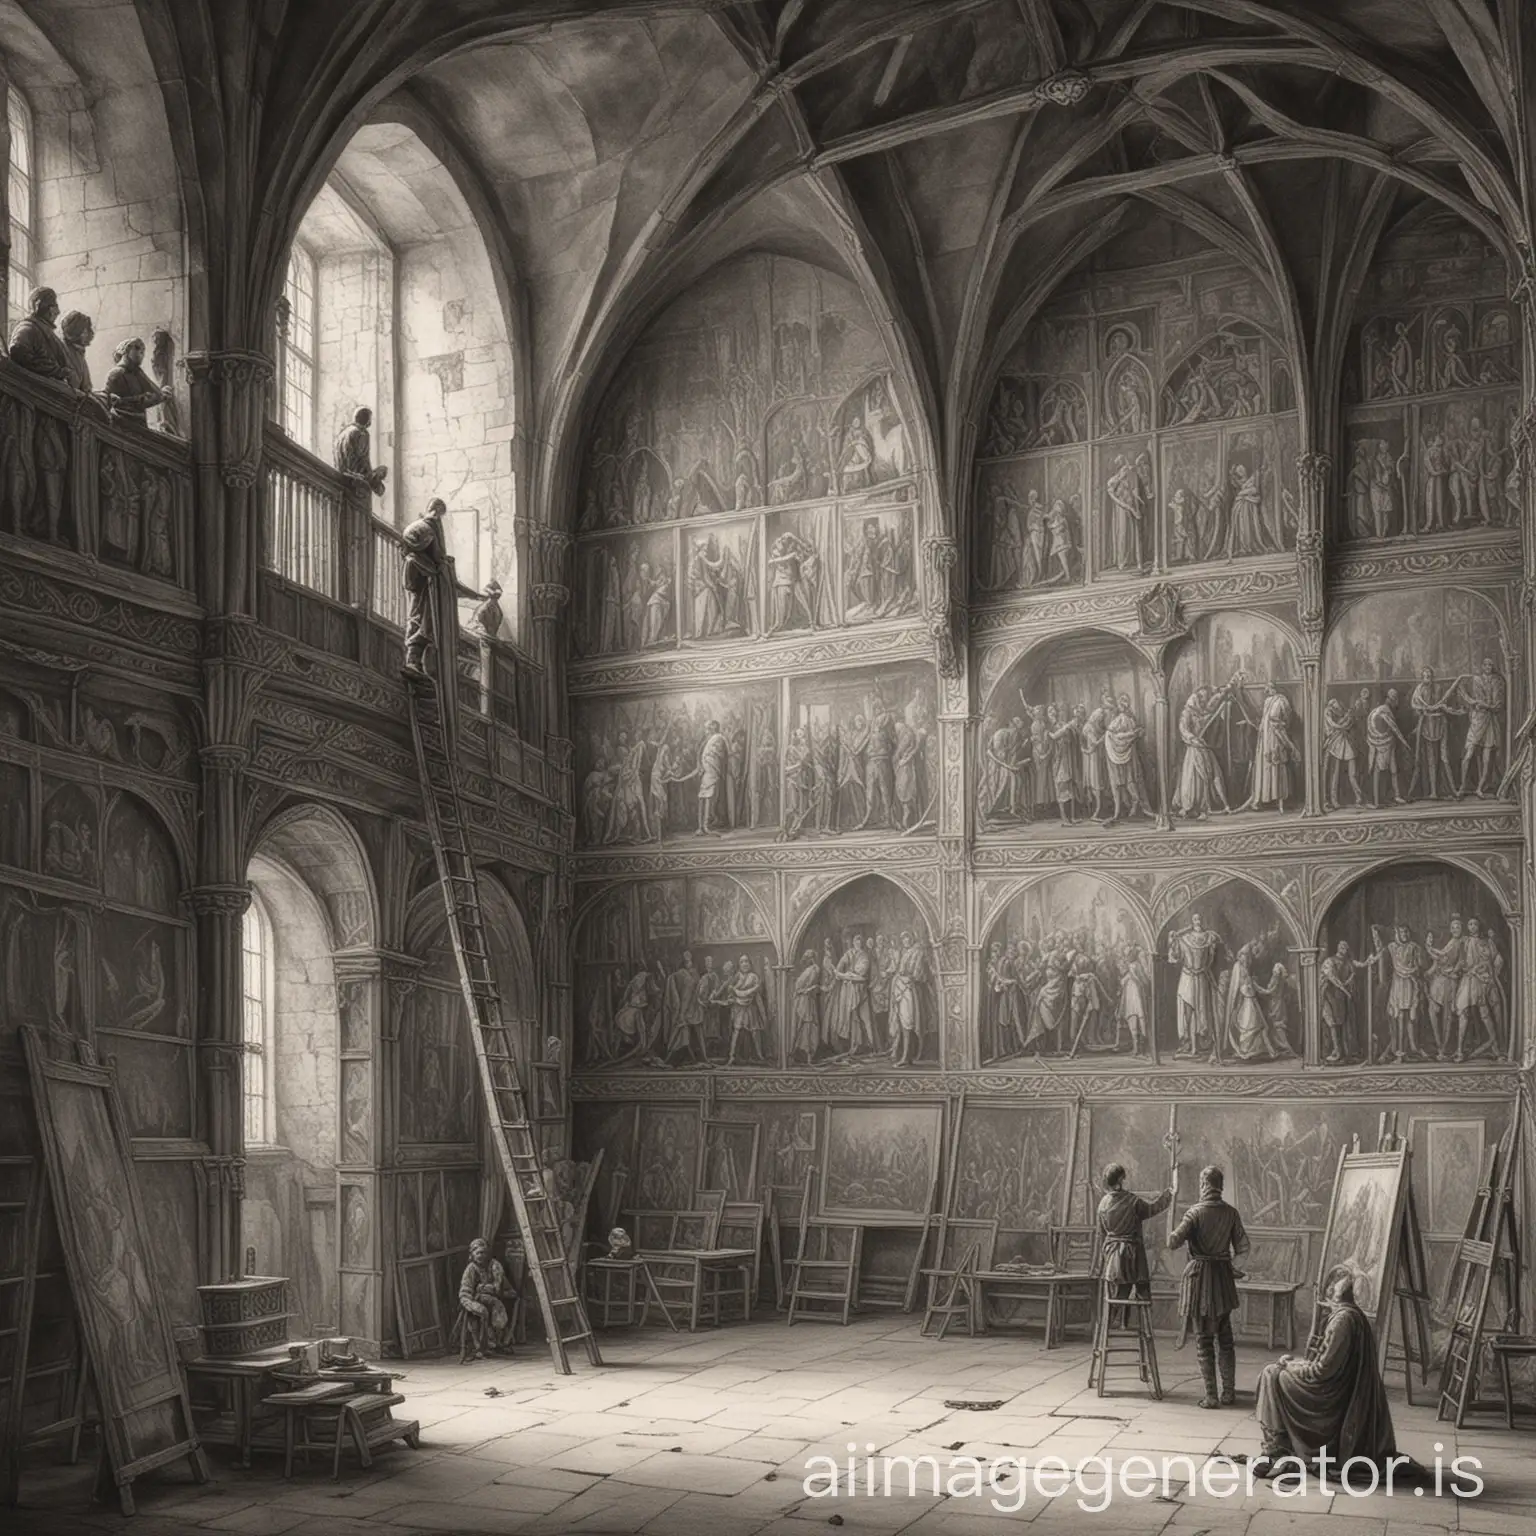 A black and white pencil sketch of  a medieval royal hall with a painter painting a wall while standing on a ladder .